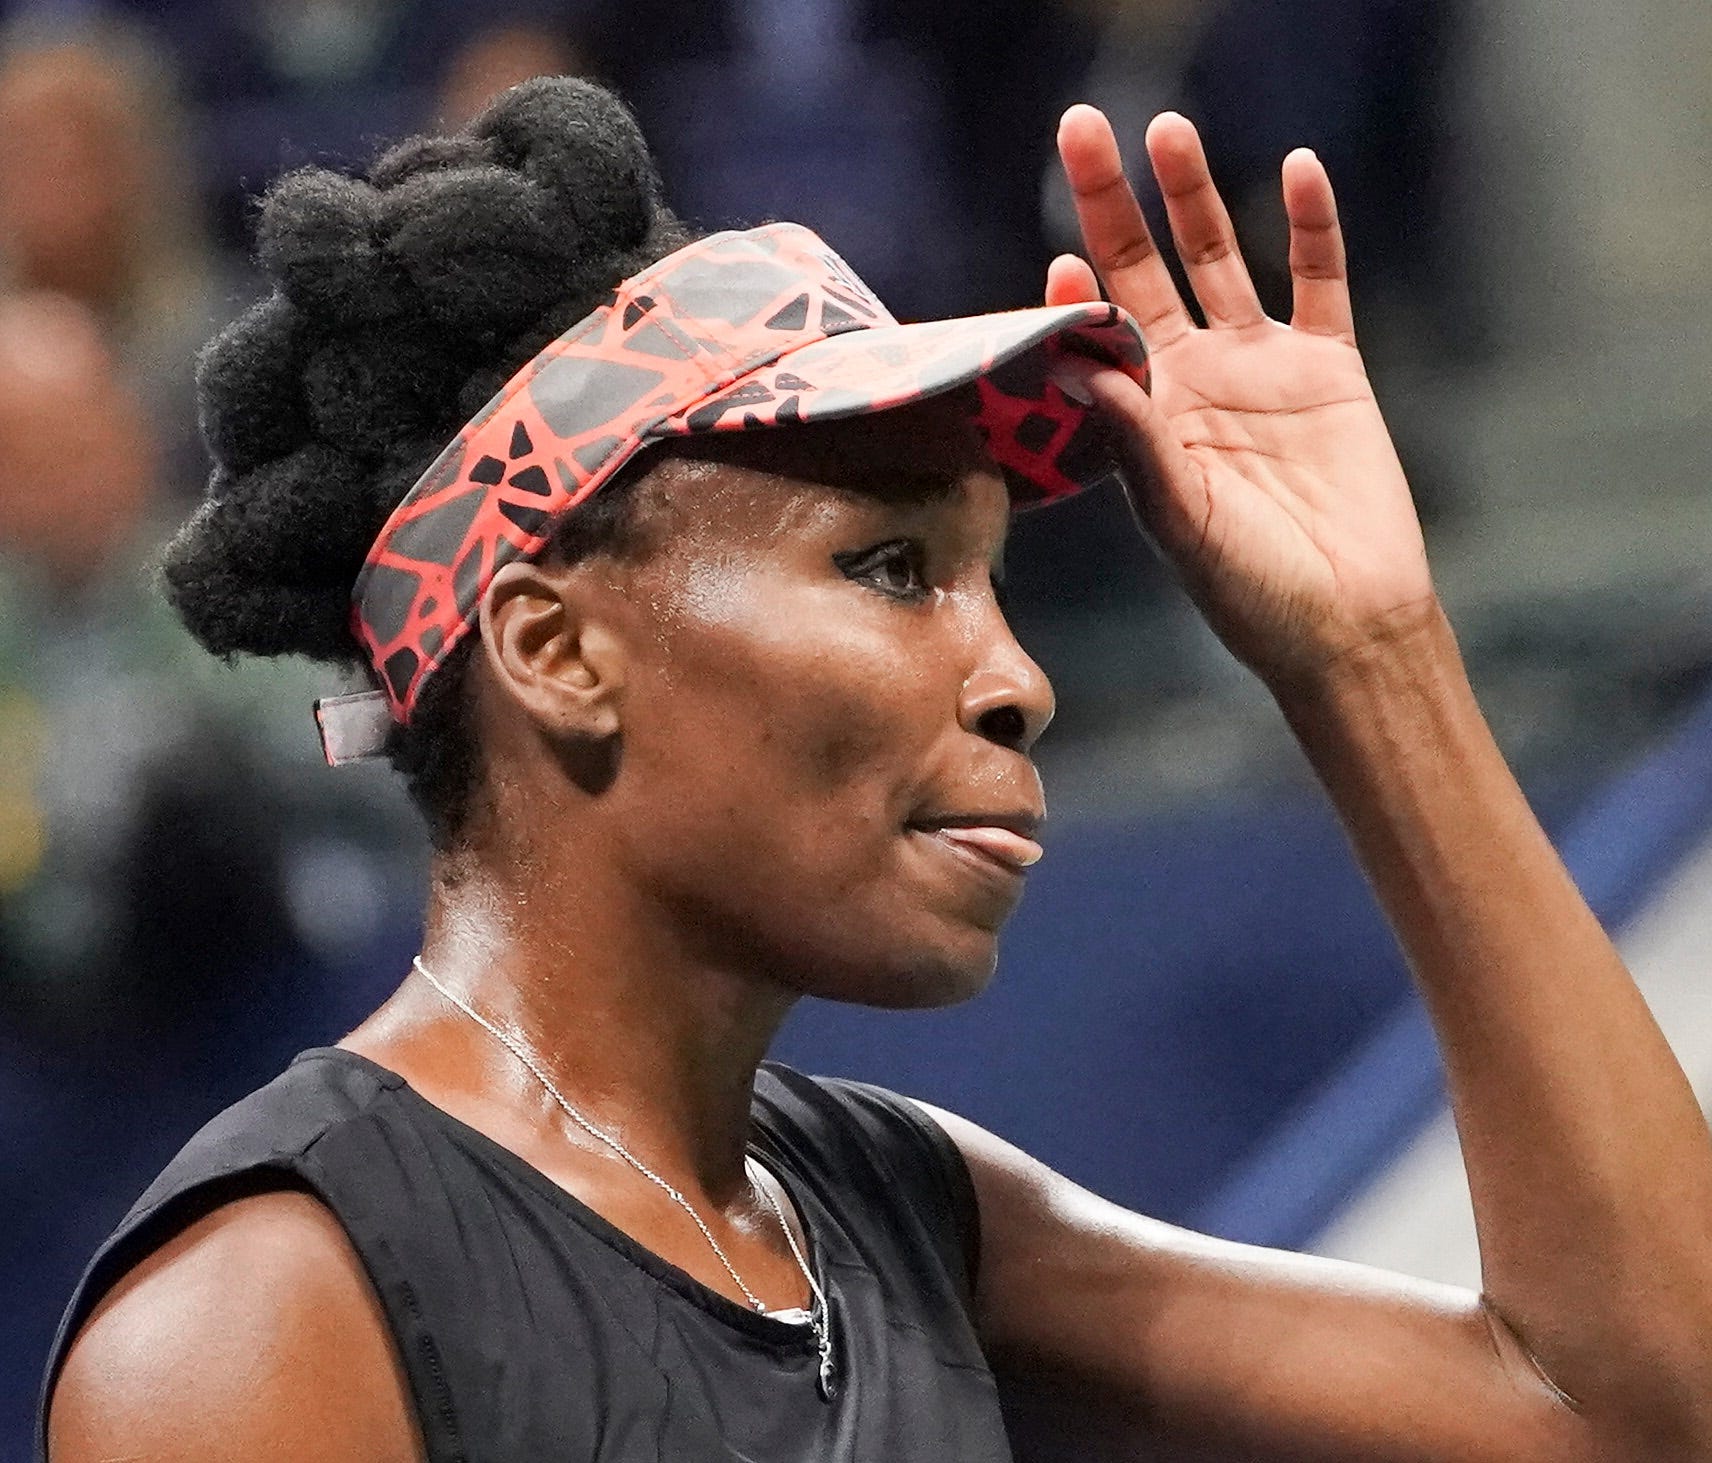 Venus Williams reacts during her U.S. Open loss to Sloane Stephens at the USTA Billie Jean King National Tennis Center in New York on Sept. 7.